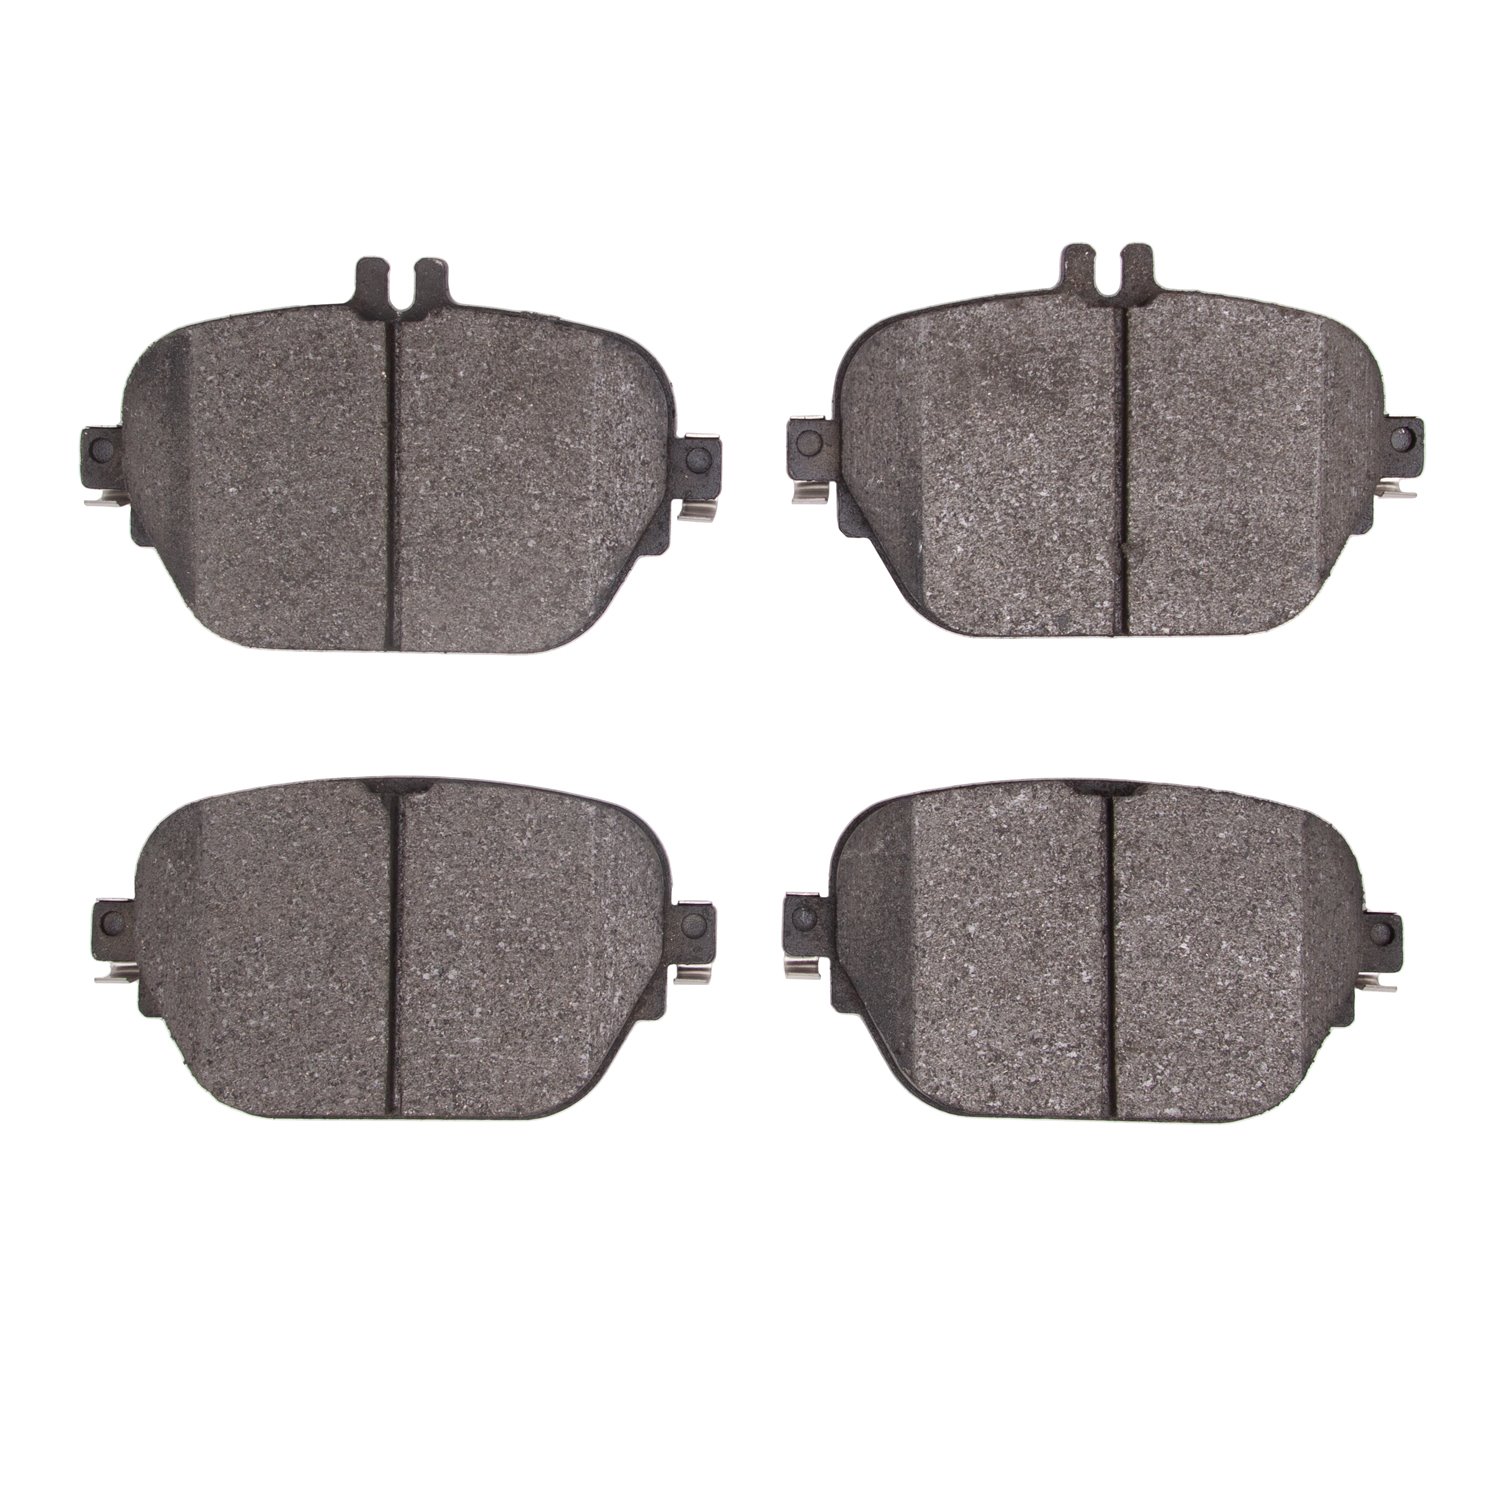 Euro Ceramic Brake Pads, Fits Select Mercedes-Benz, Position: Rear